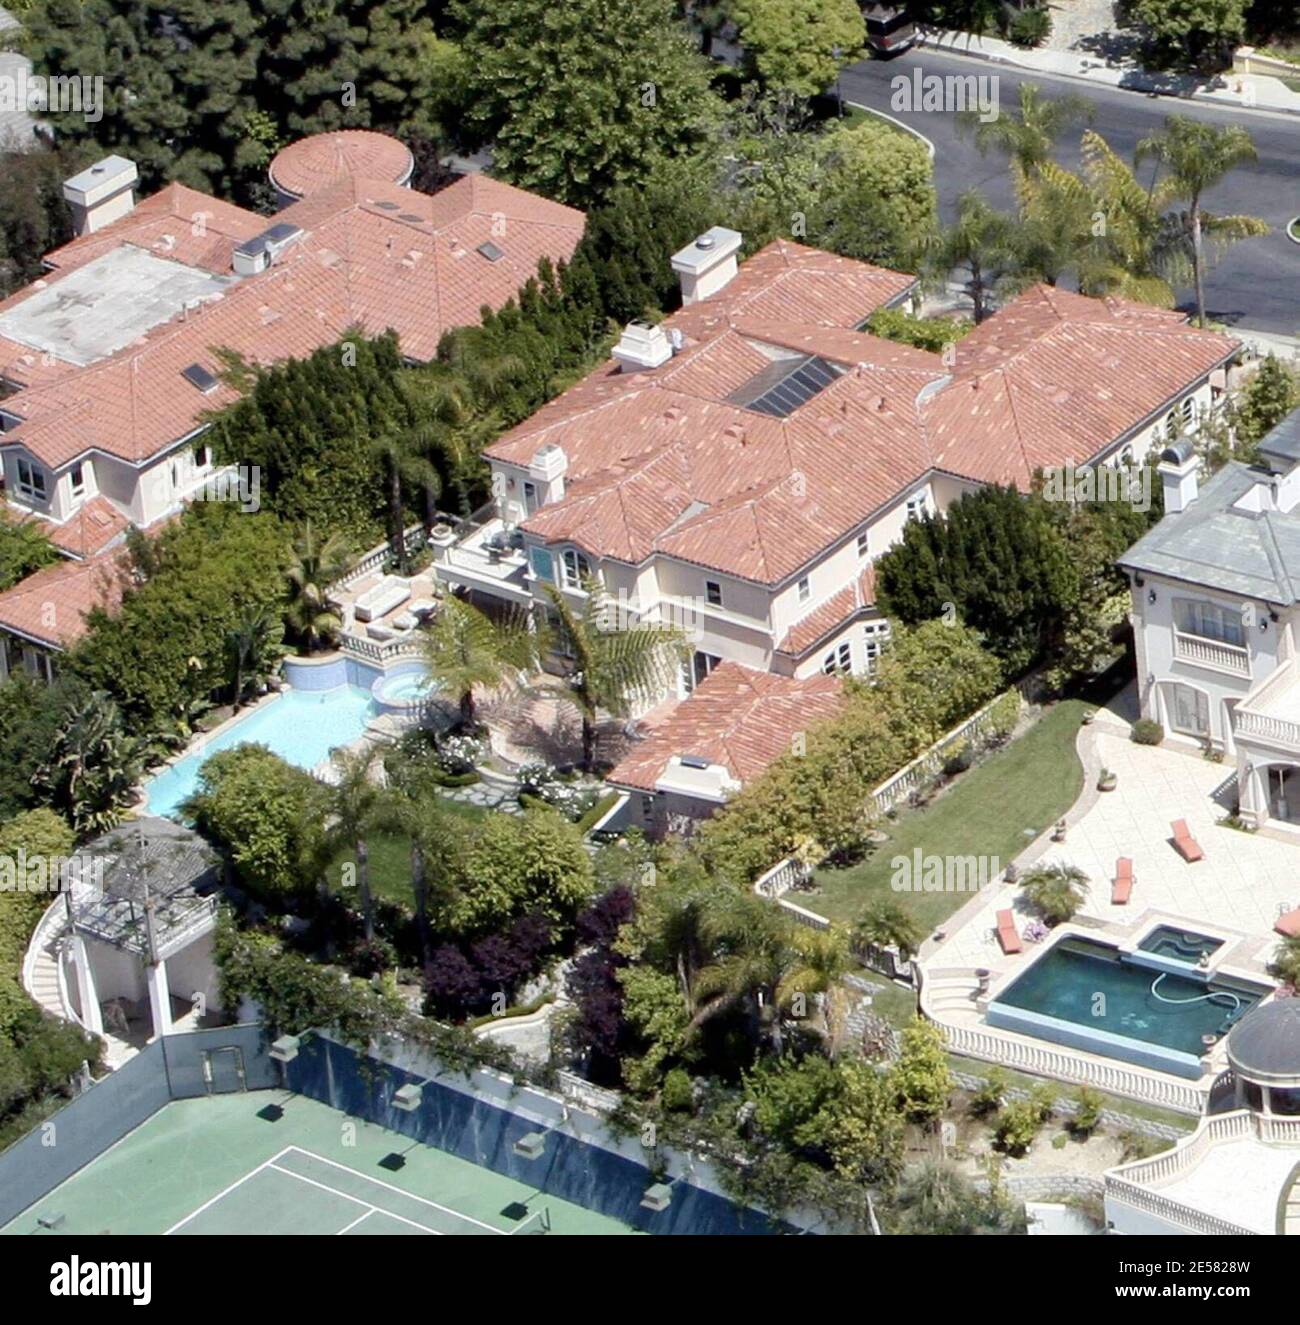 Exclusive!! Avril Lavigne and Deryck Whibley are selling their five bedroom, 6,864-square foot mansion in Beverly Hills, Ca. and moving up to a larger pad. Since they purchased a new home in Bel Air for $9.5 million they are keen to get this old property sold and have reduced the price from rom $6.9 million to $6.2 million. The new home has 8 Beds, 10.5 baths, plenty of room for the family that Avril has said she plans to have. 4/19/07    [[rac ral]] Stock Photo